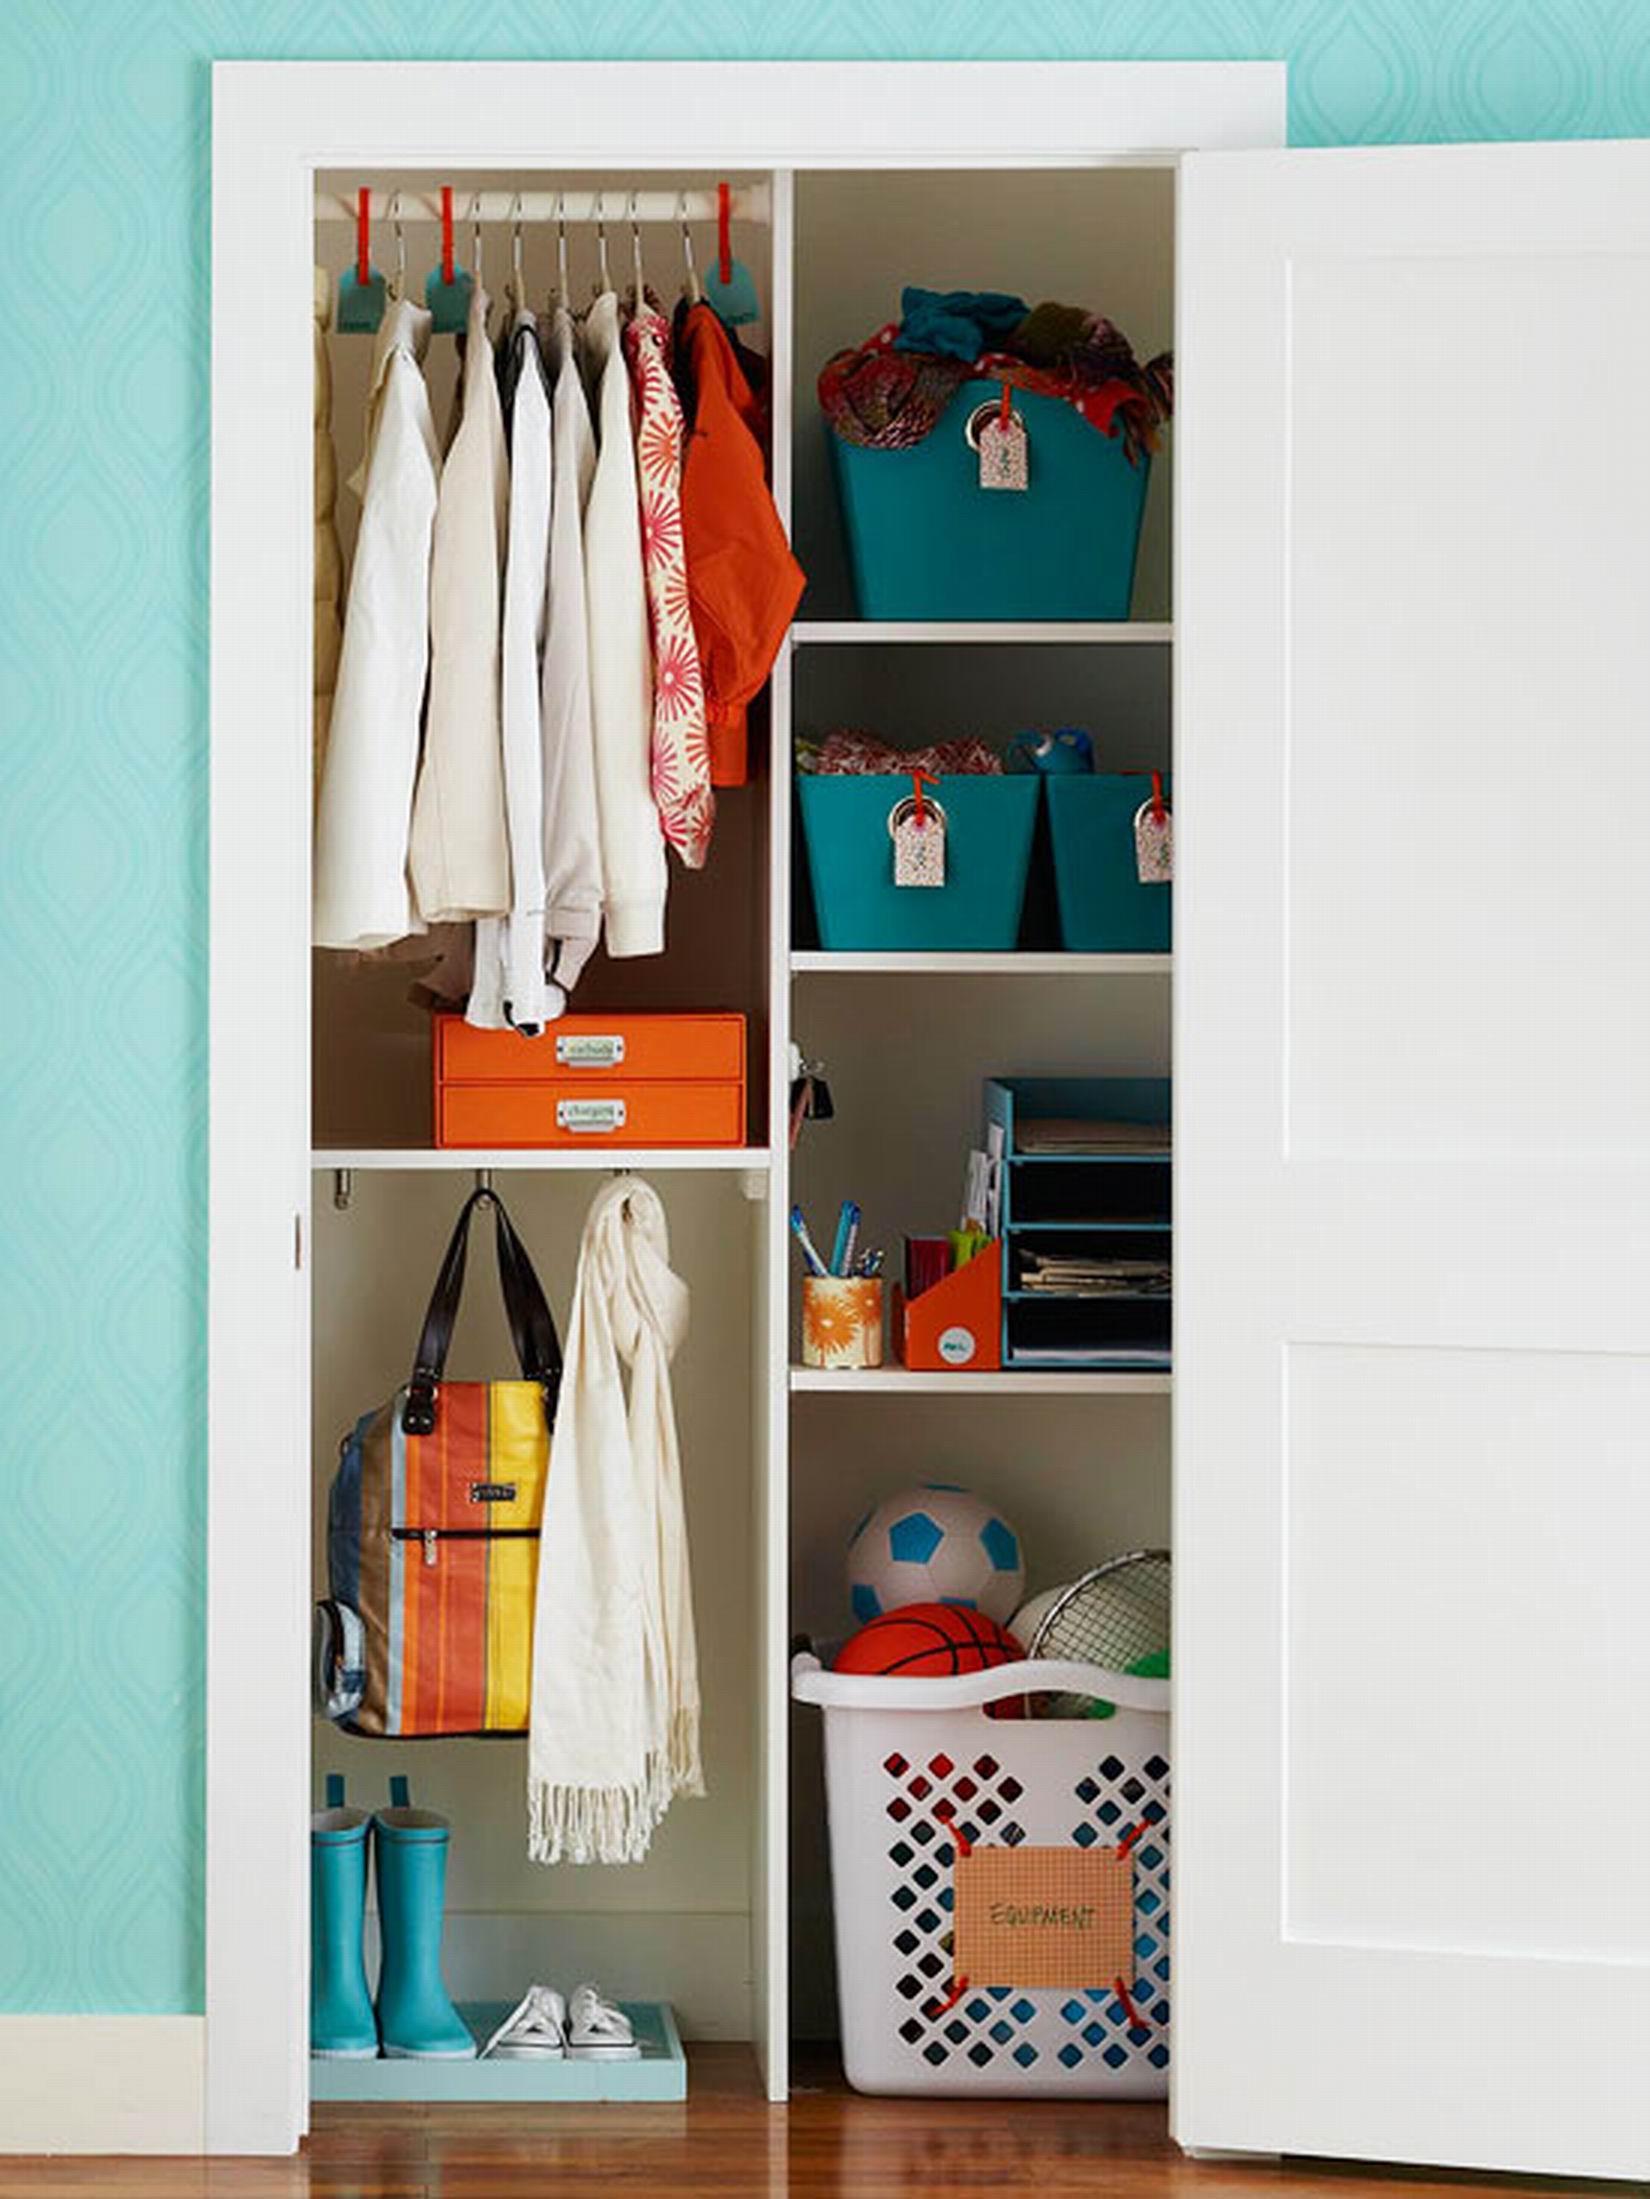 50 Best Closet Organization Ideas and Designs for 2016